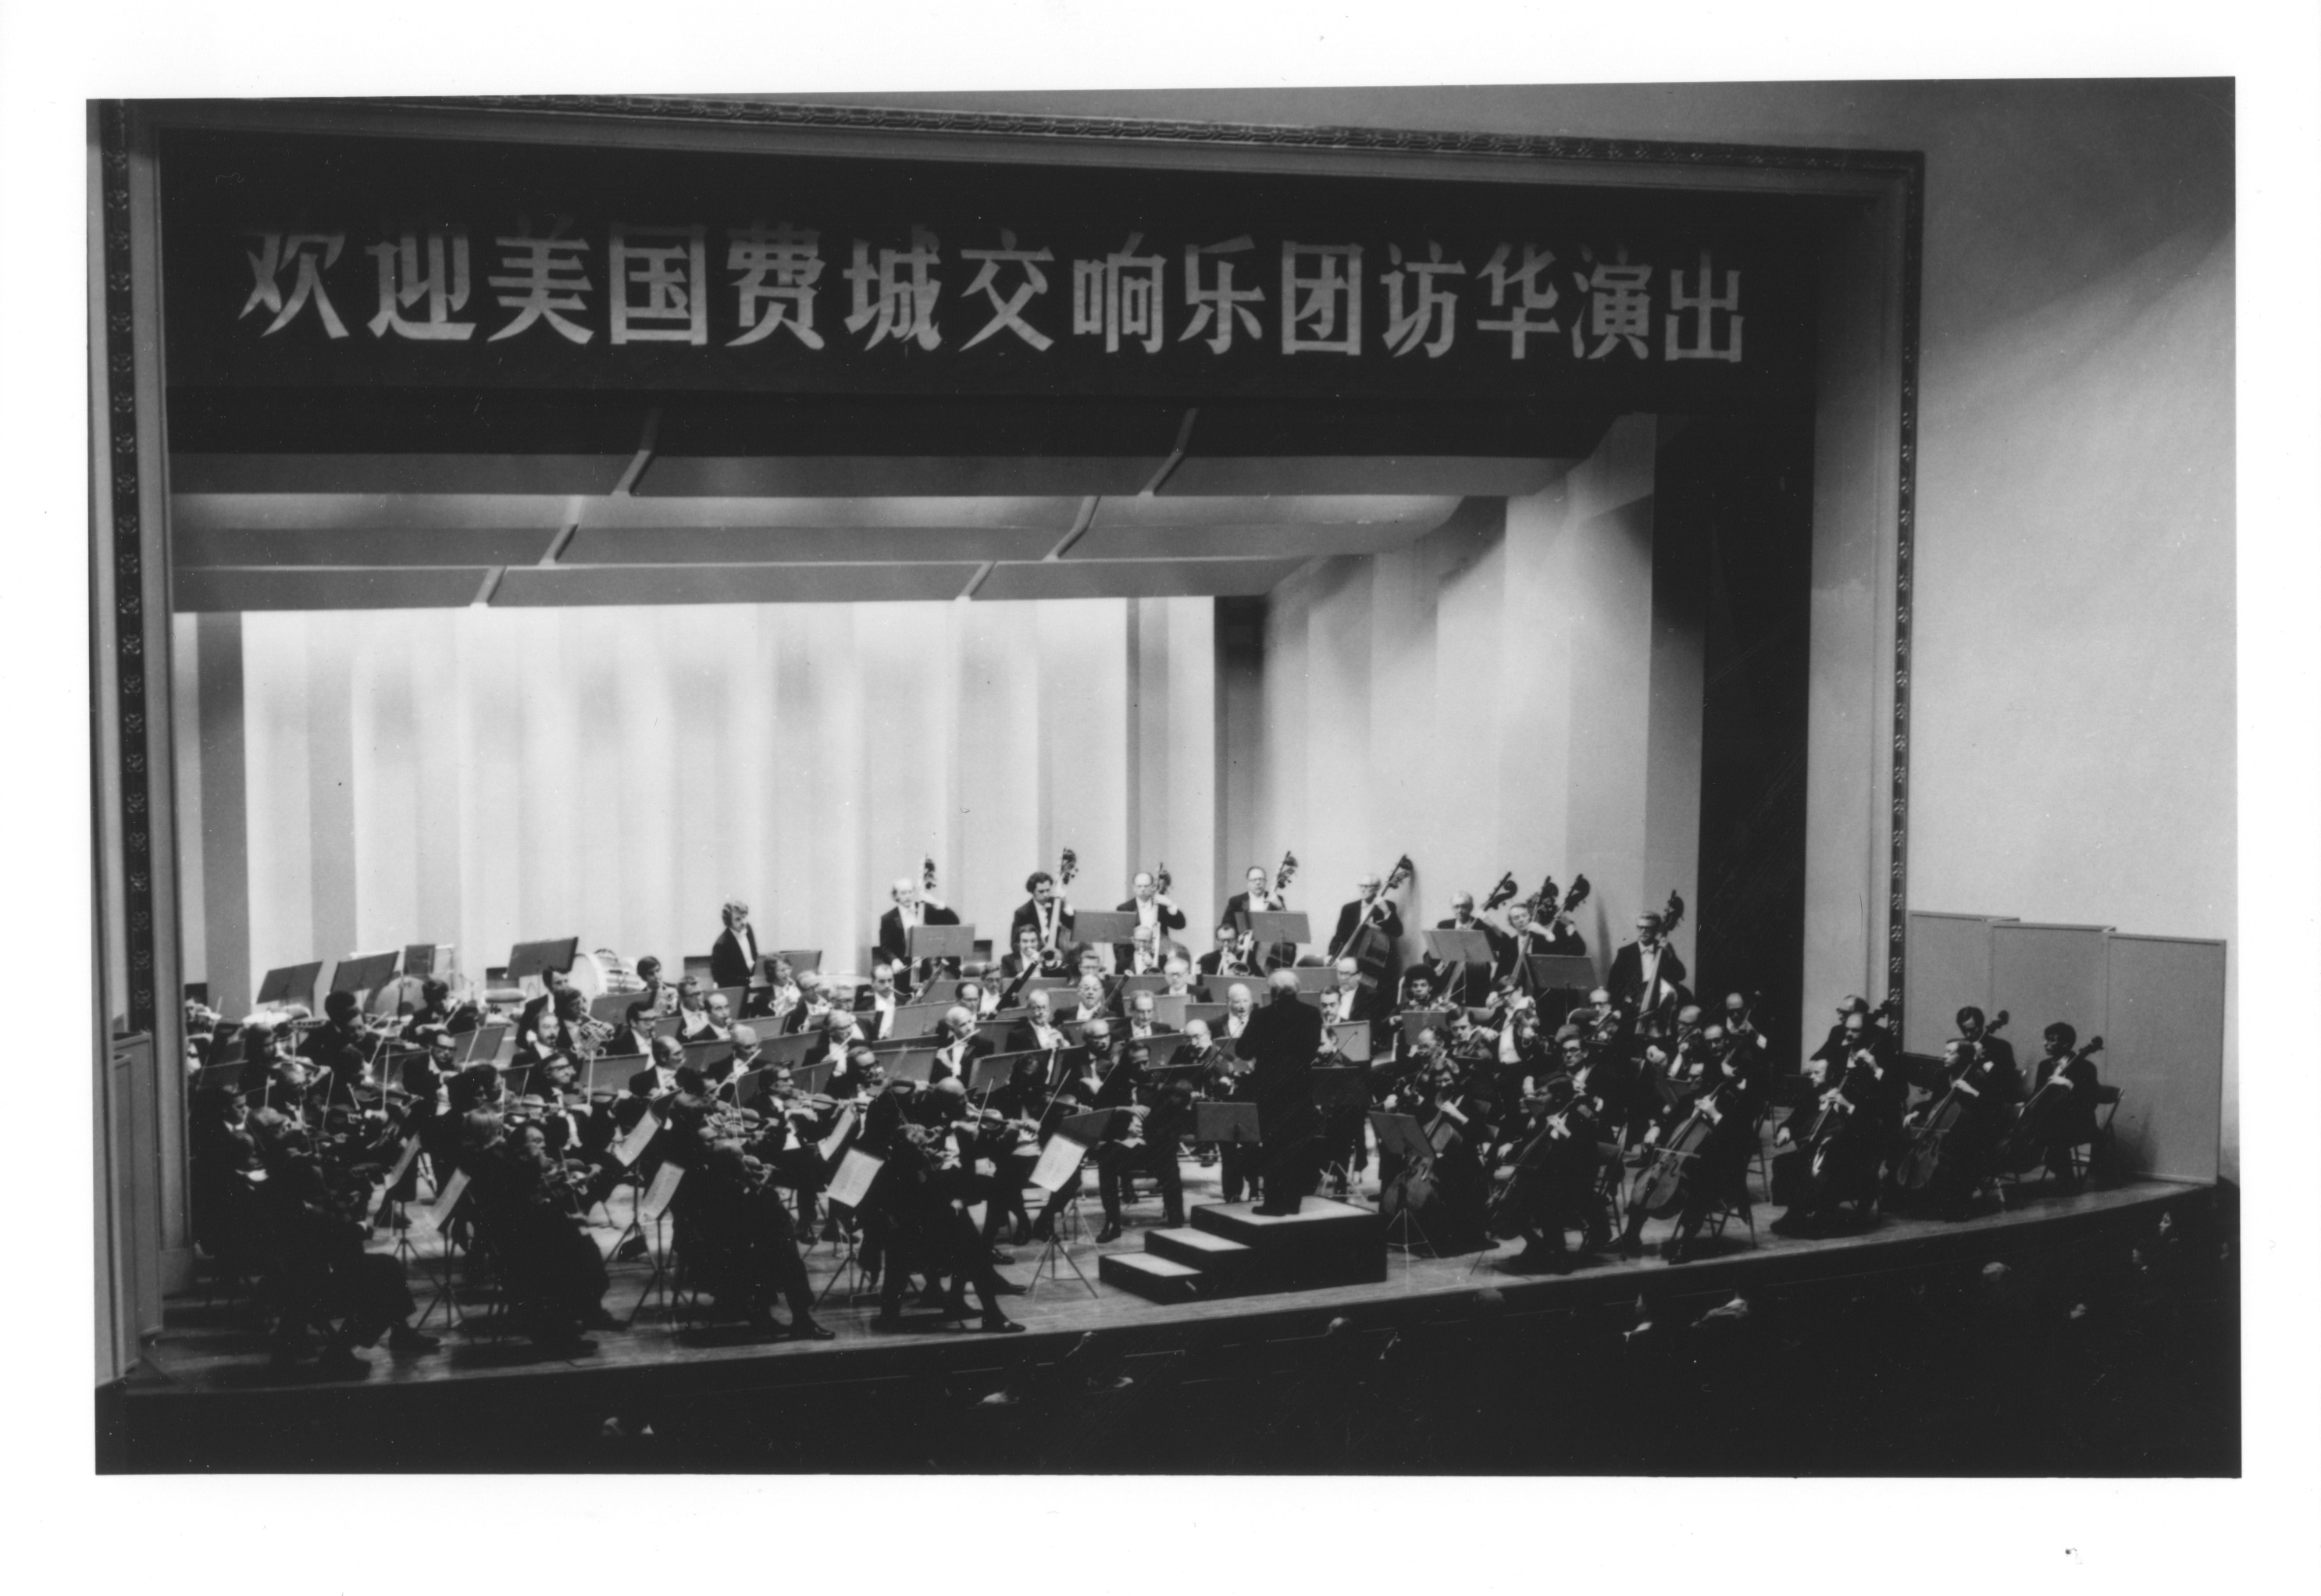 Archive photo of the 1973 performance of the Philadelphia Orchestra in Beijing, China. /Davyd Booth